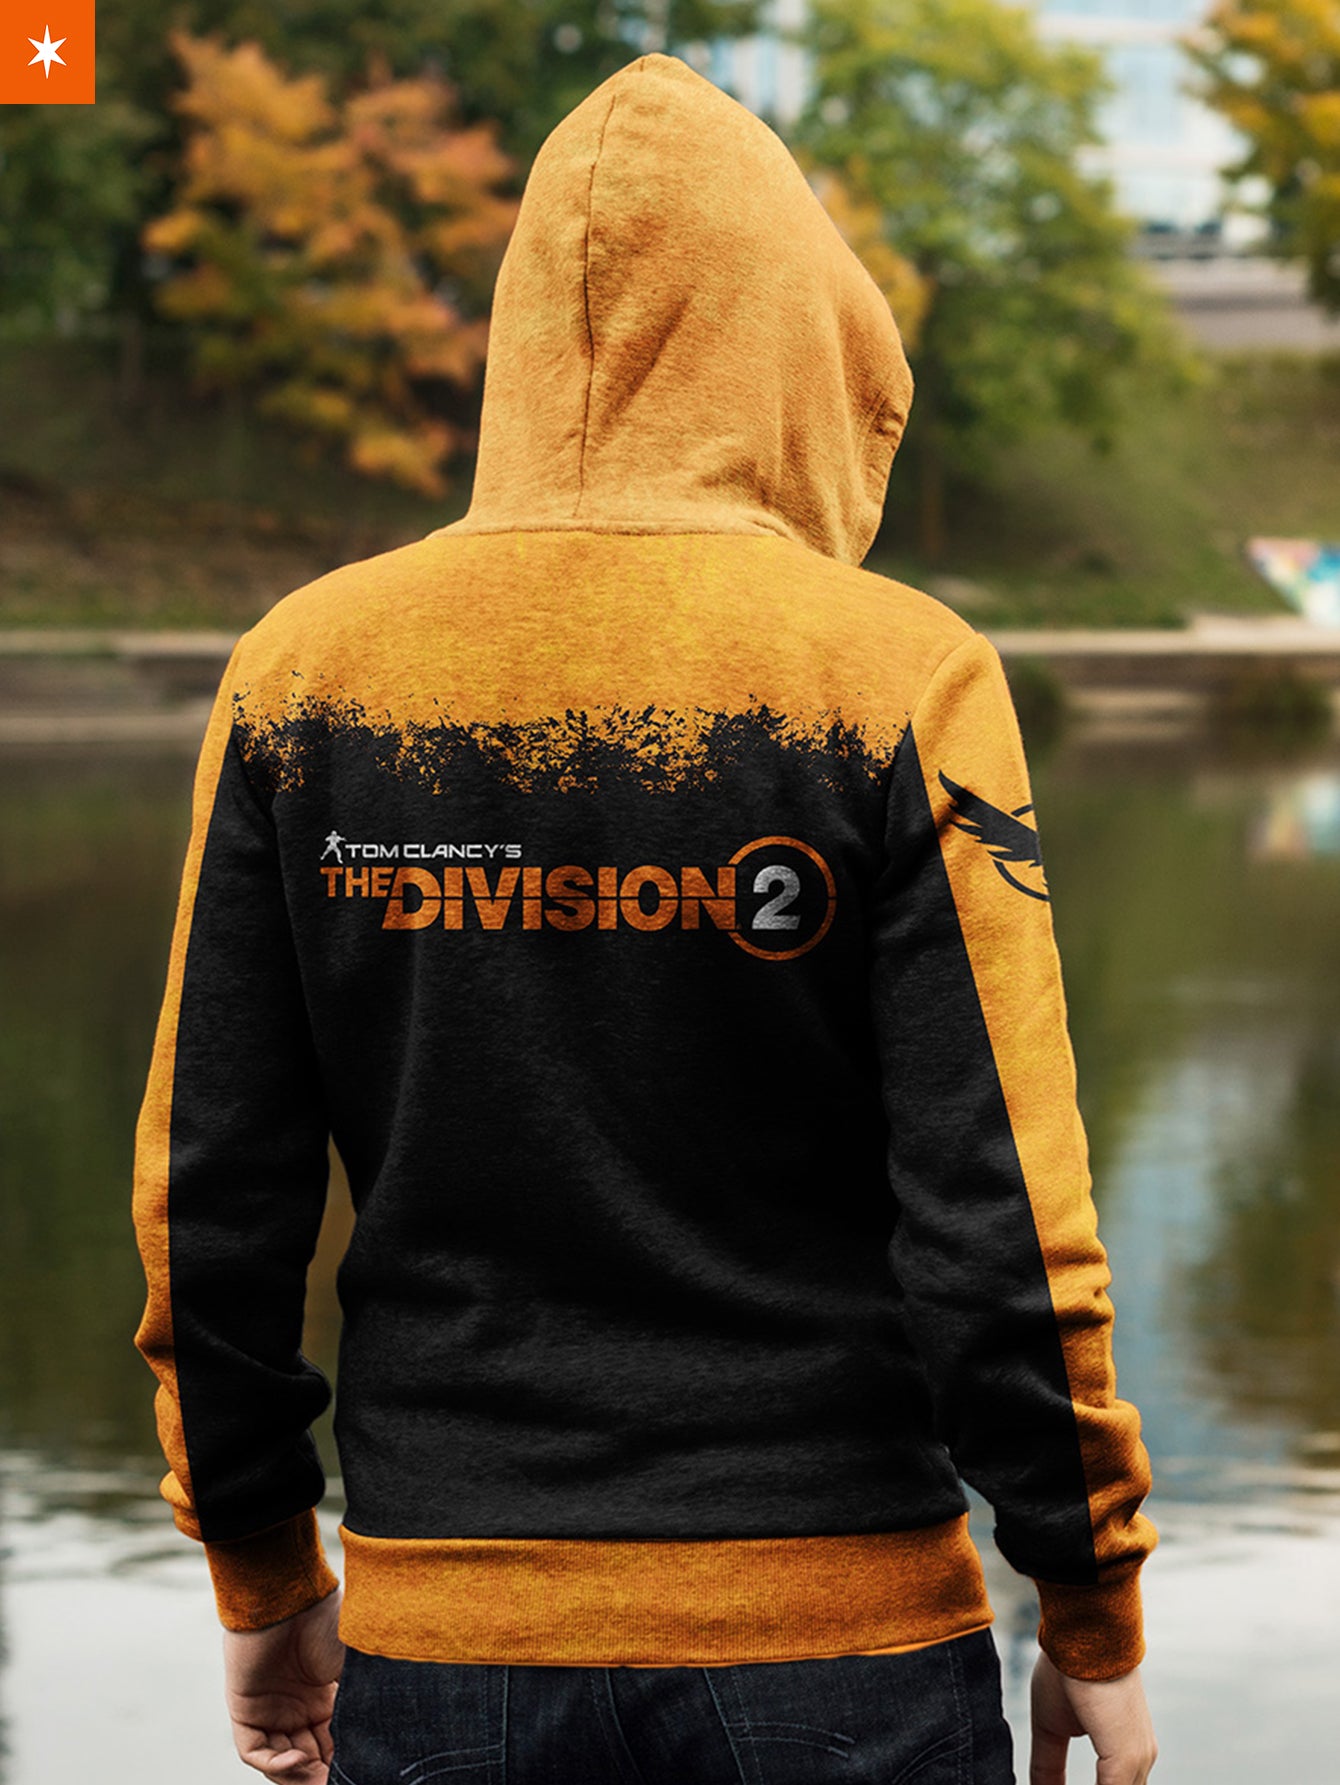 Fandomaniax - Tom Clancy's The Division 2 Unisex Zipped Hoodie